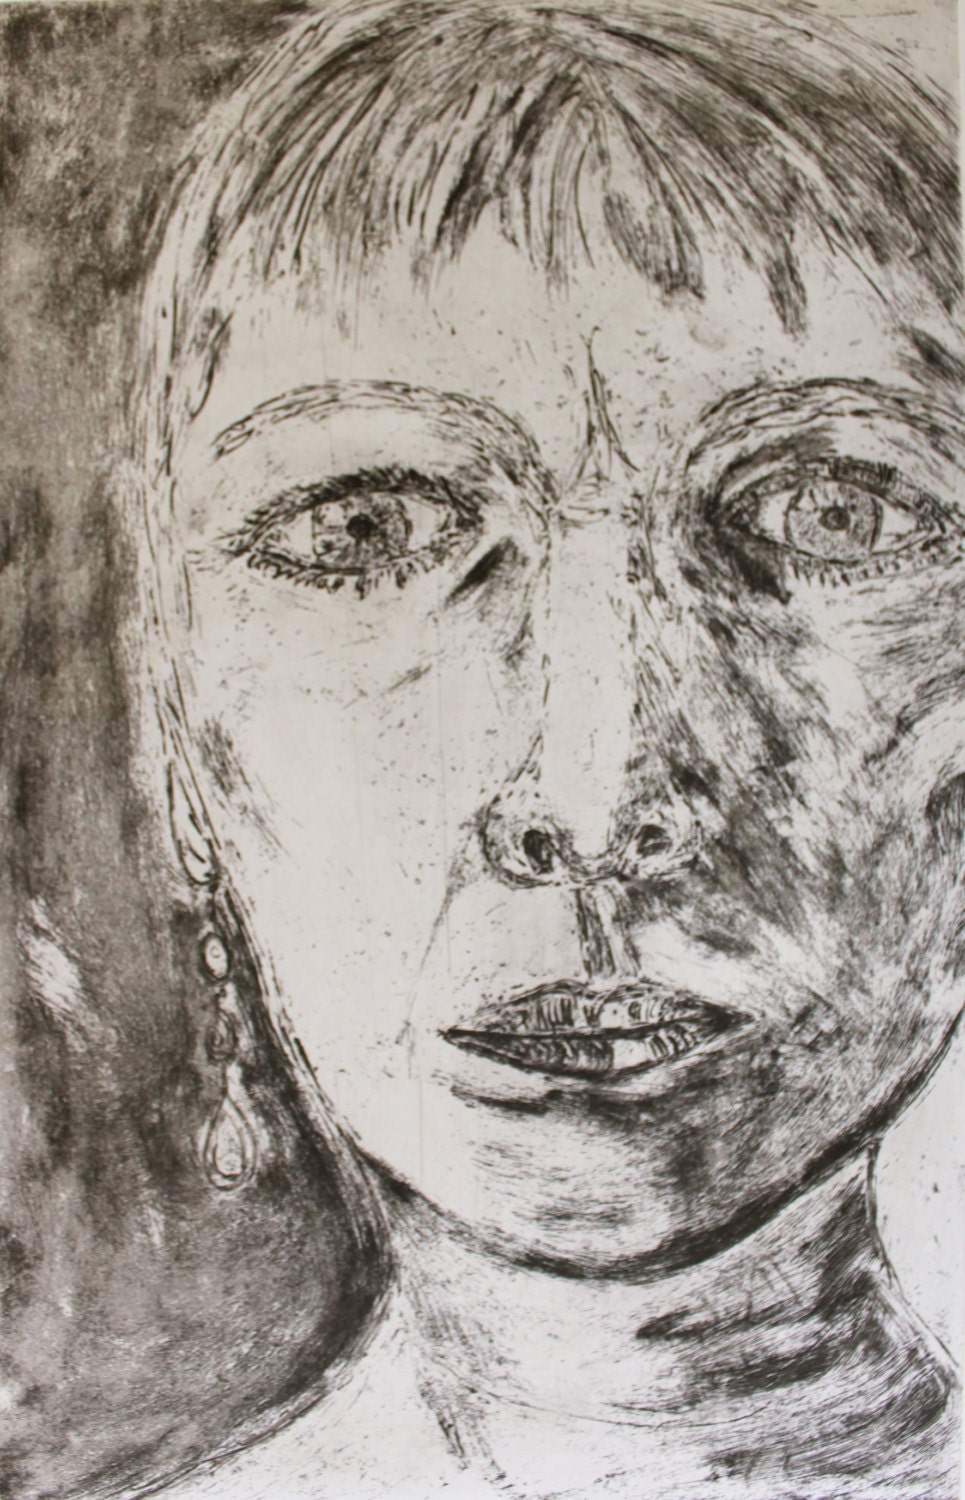 Self Portrait - 7.5 x 12 inch (on 13 x 16 inch paper) hand-pulled etching print by Silke Powers